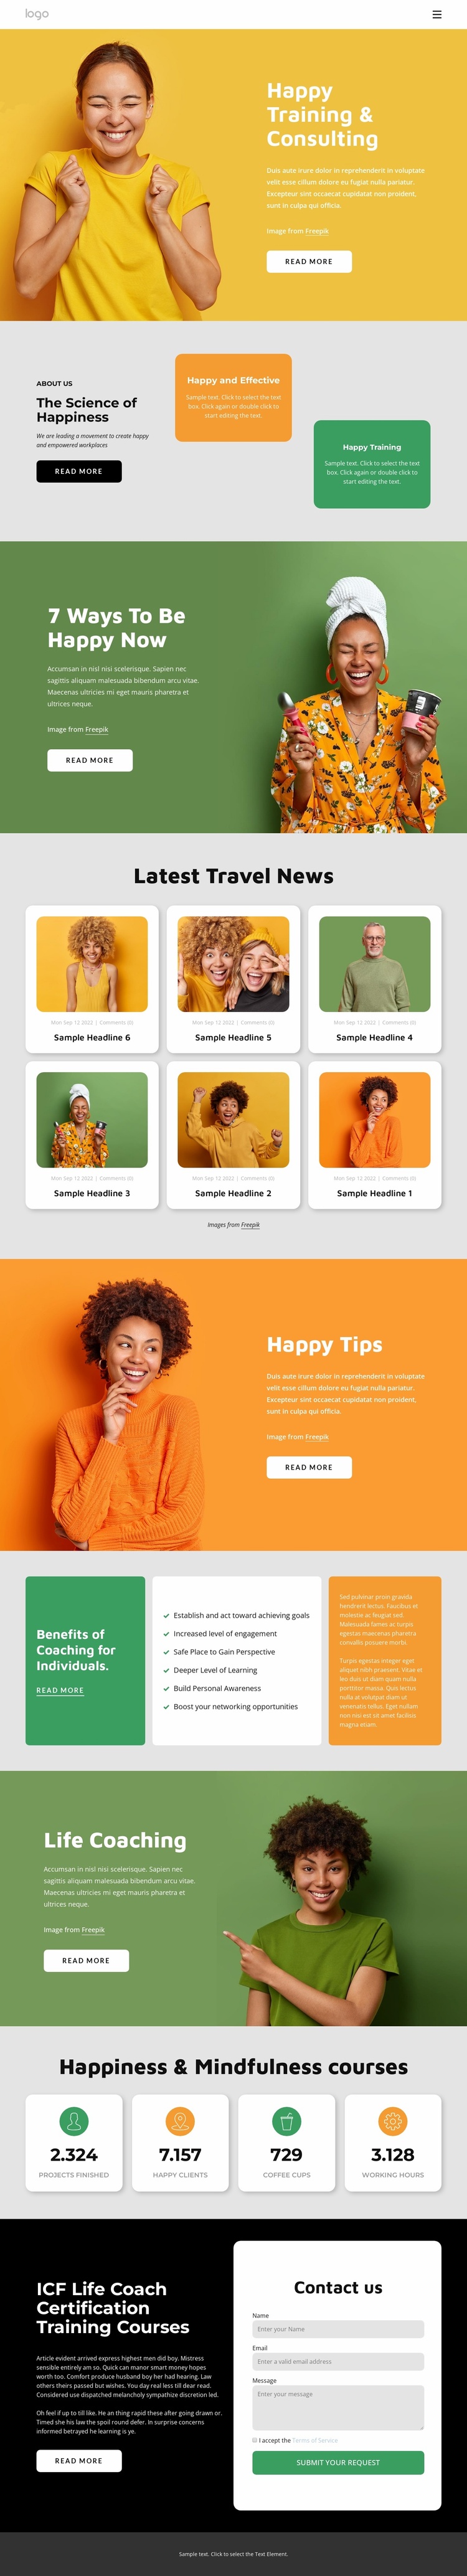 Happiness consulting Ecommerce Website Design